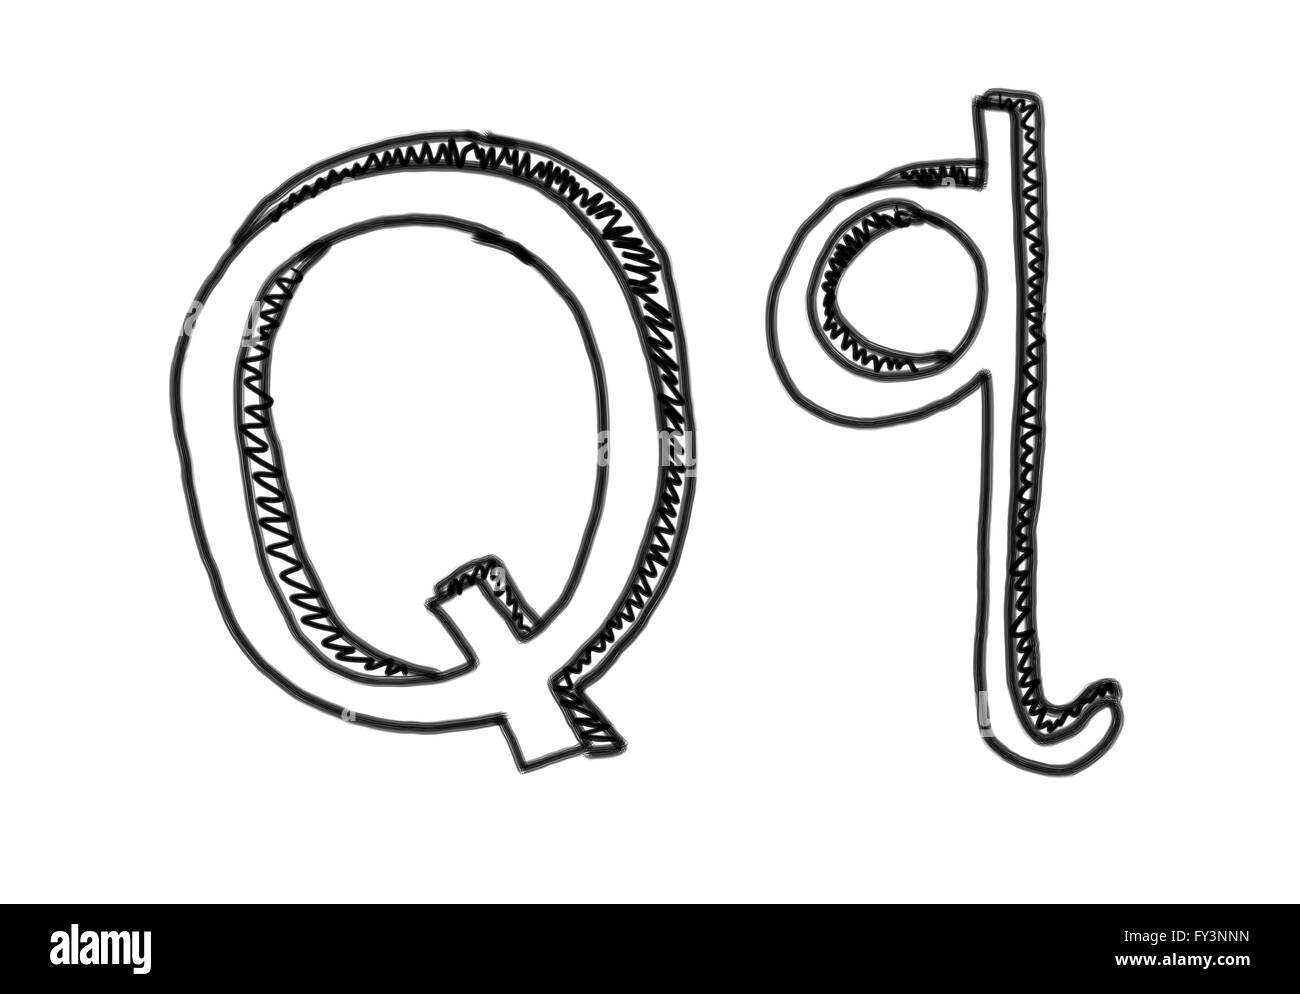 New drawing Character Q of alphabet logo icon in design elements. Stock Photo